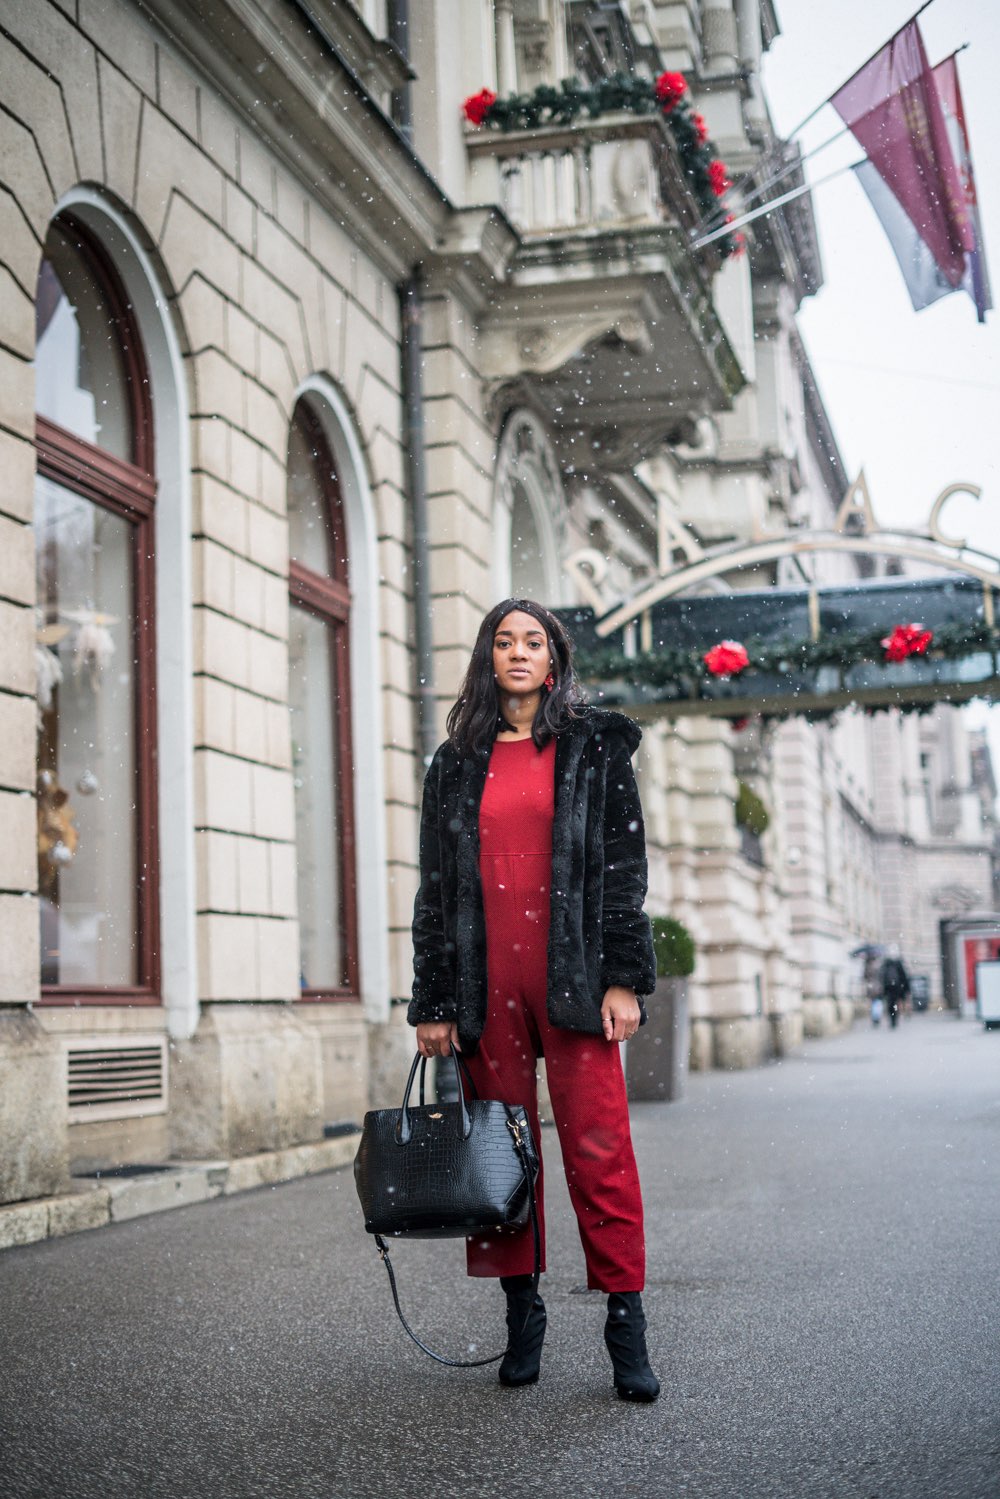 Fashionblogger wearing red and black outfit for Christmas